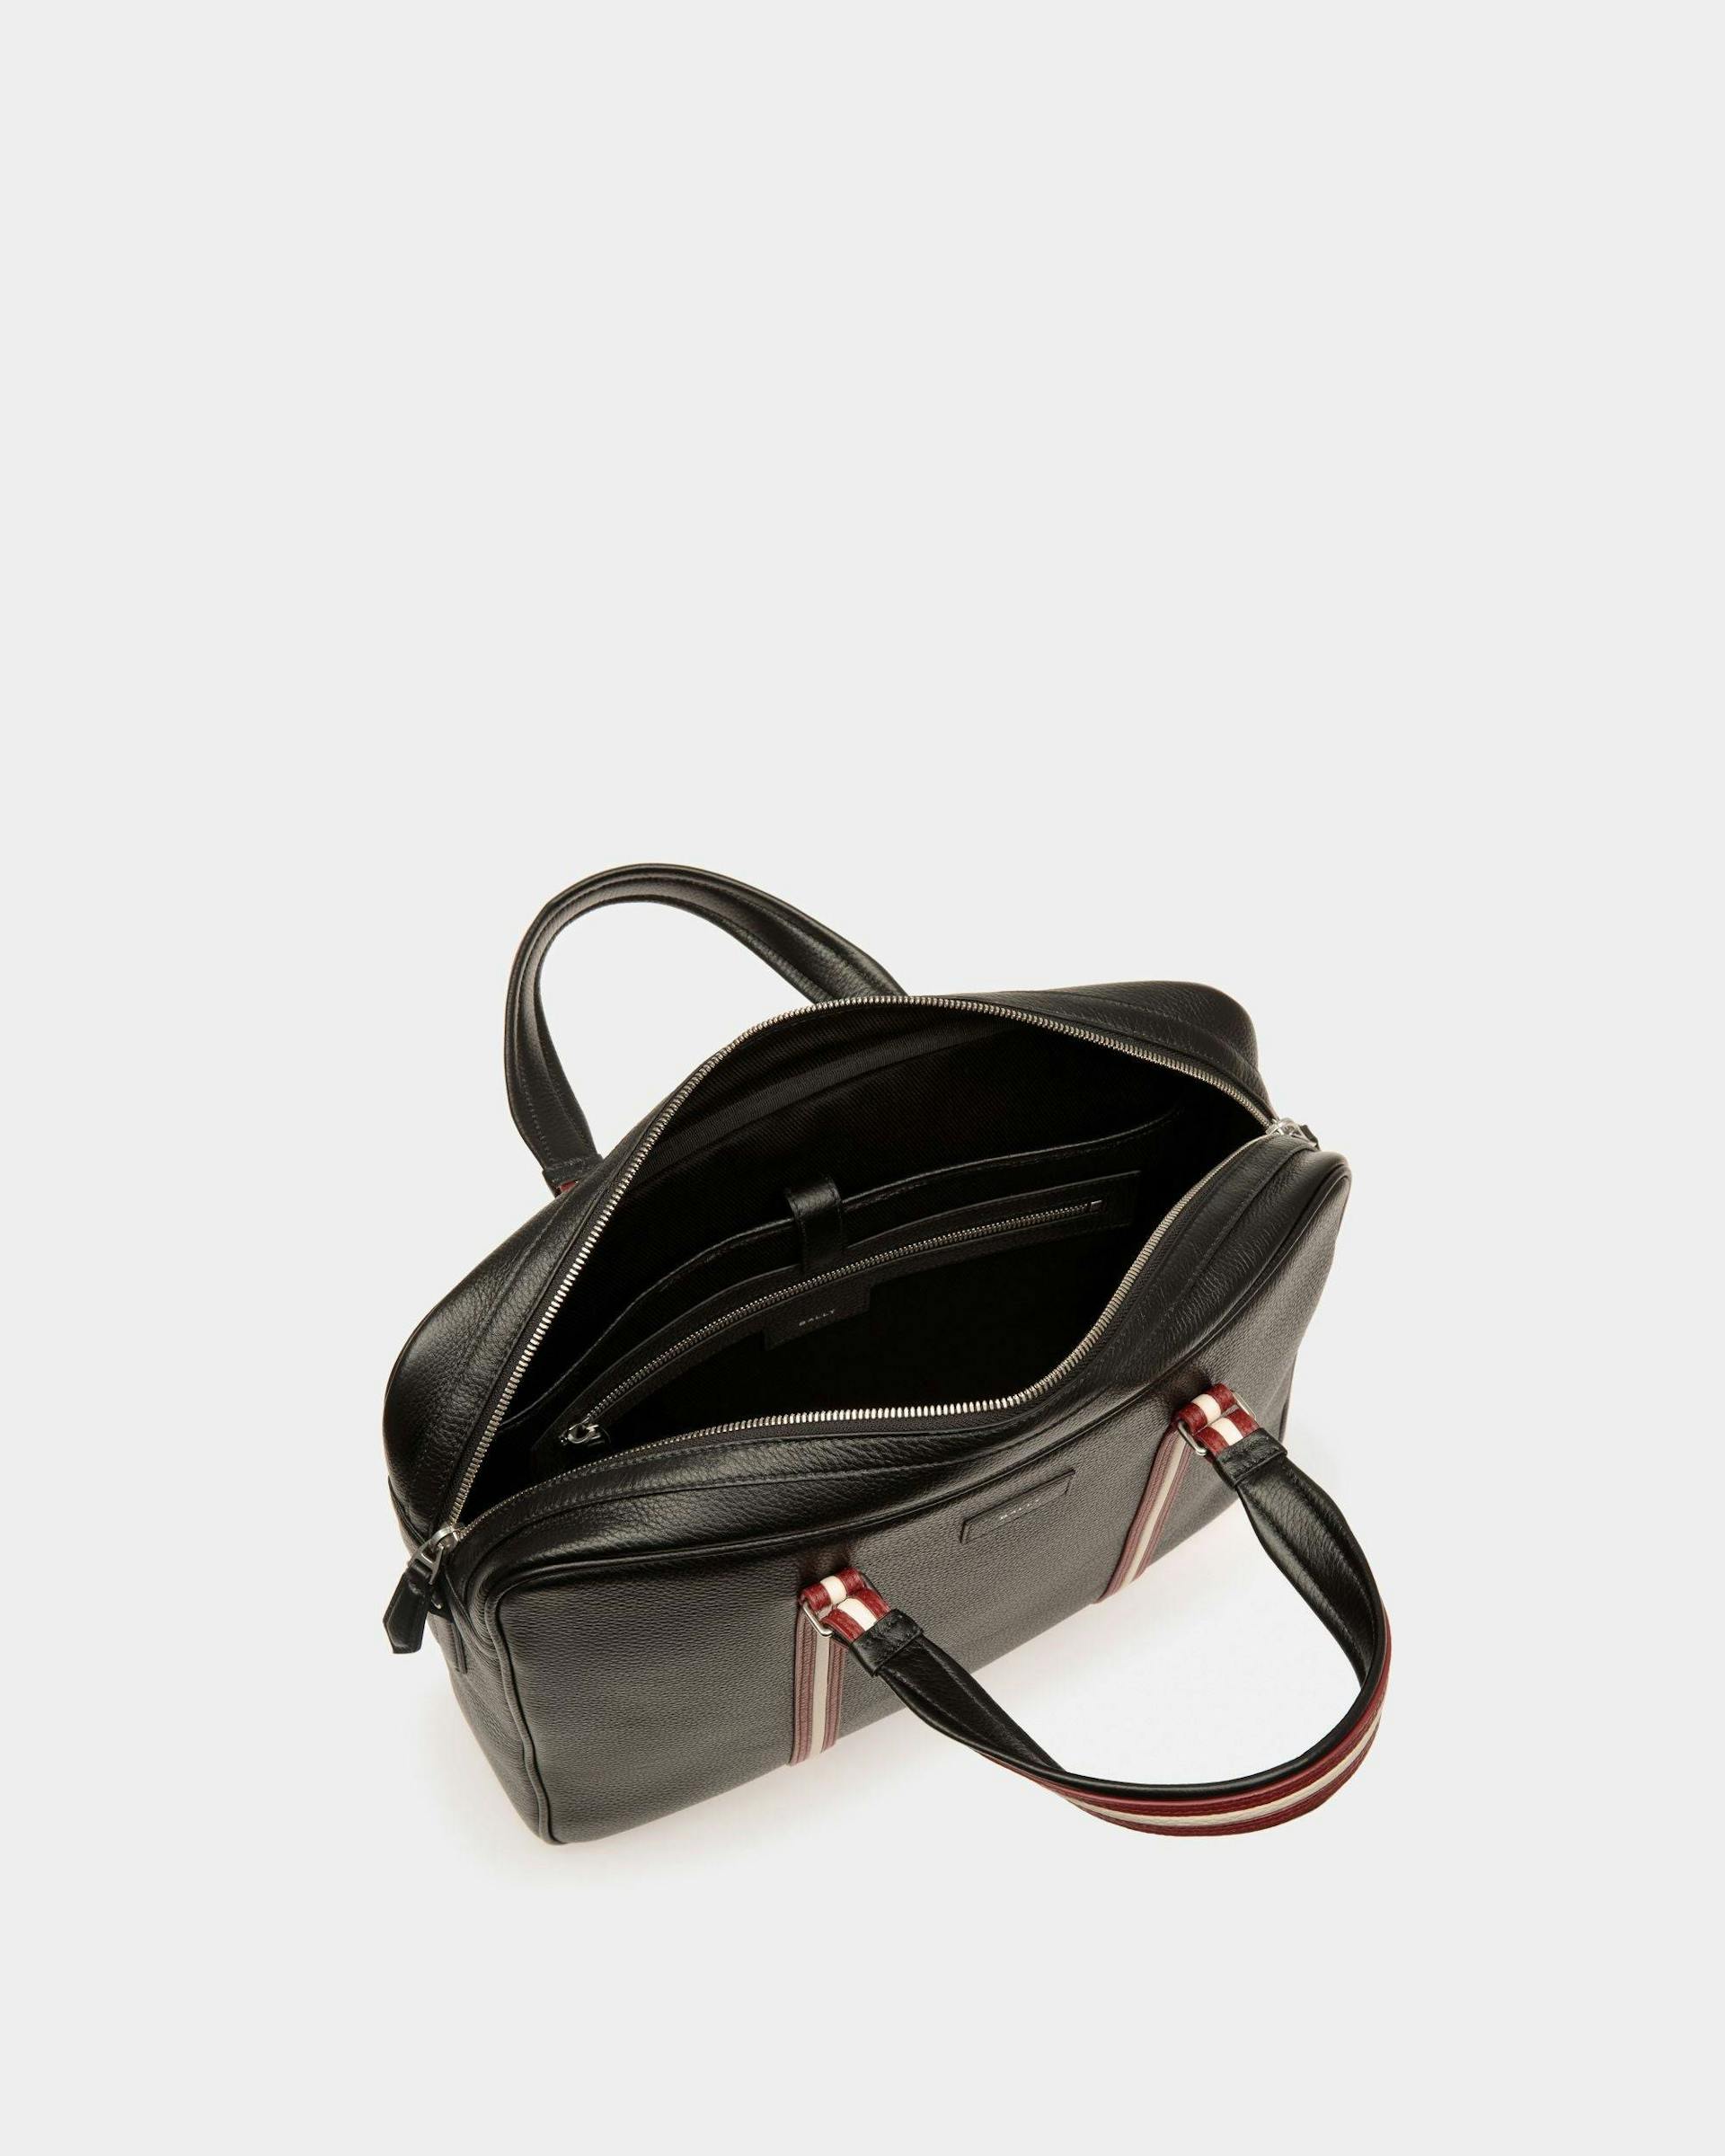 Men's Code Briefcase In Black Grained Leather | Bally | Still Life Open / Inside